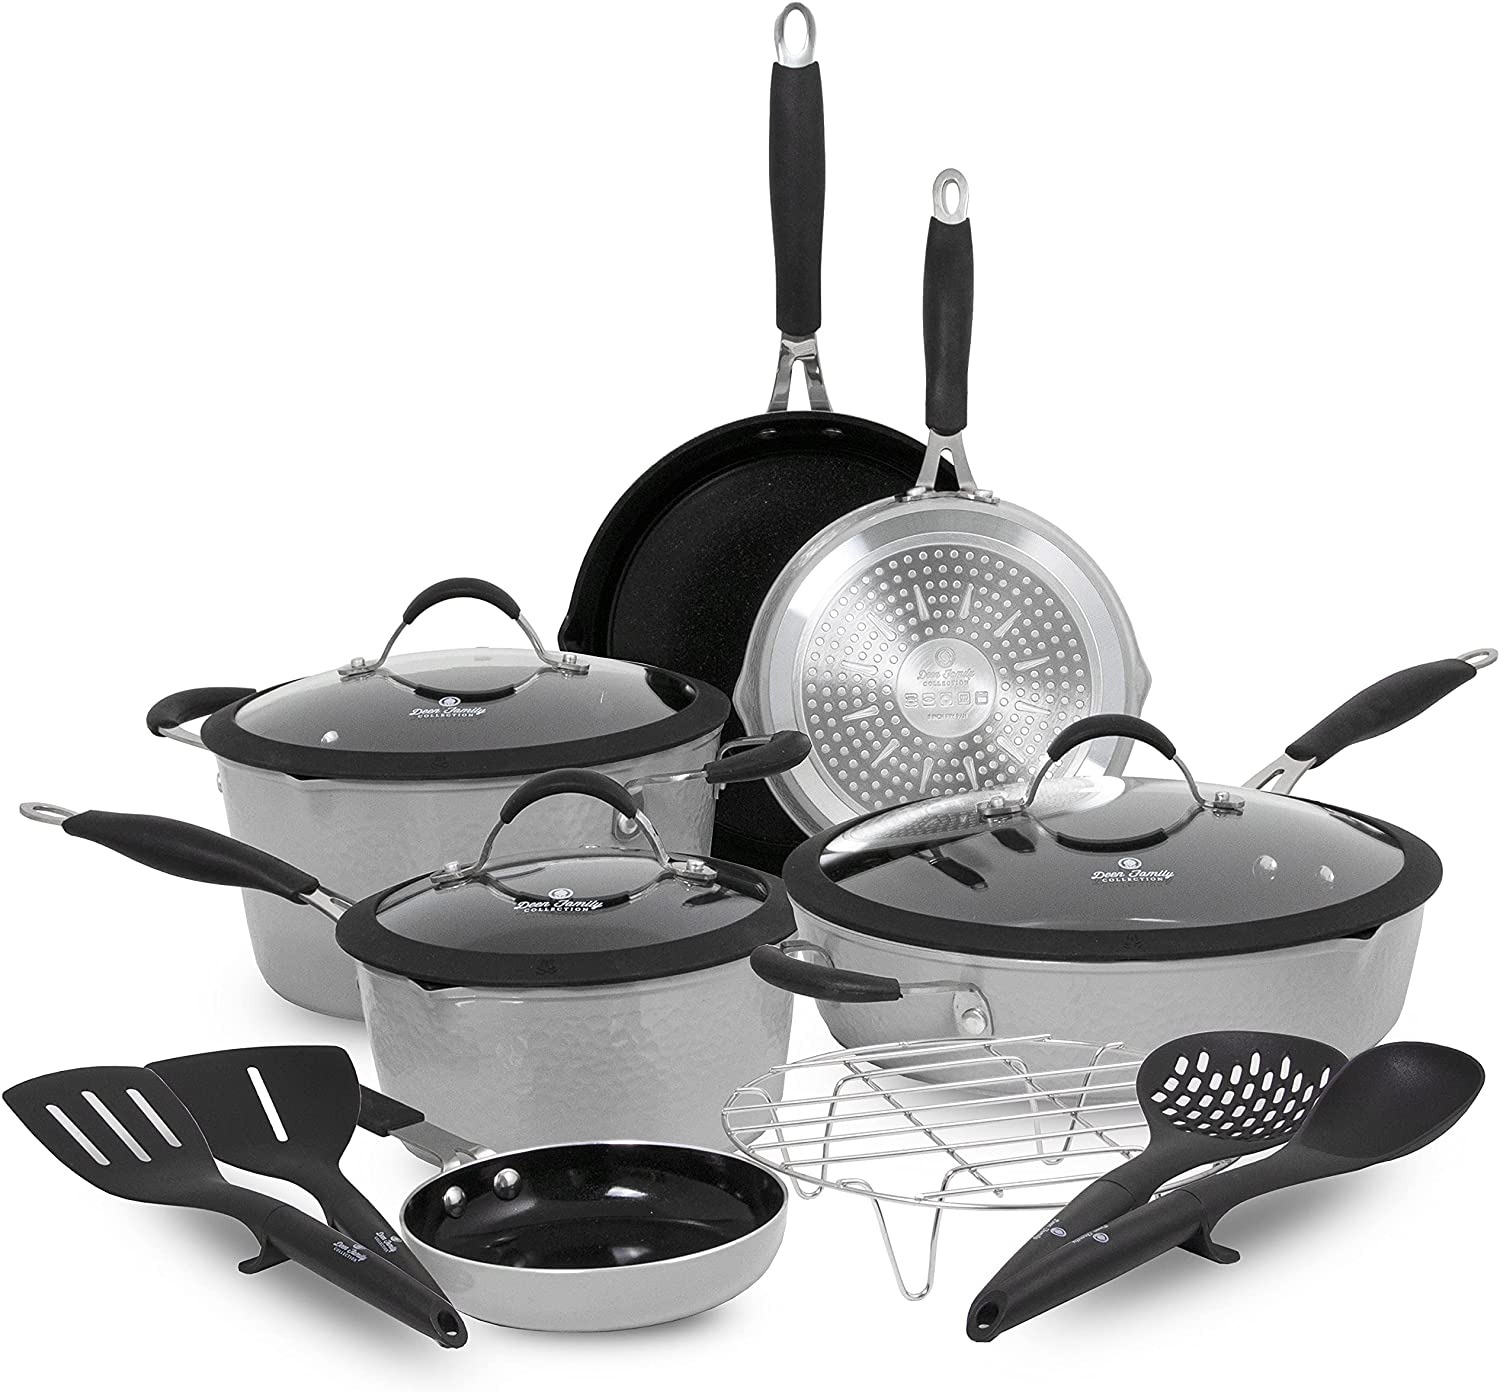 Paula Deen DFCW12SB-RB Family 14 Piece Ceramic Non-Stick Cookware Set 100%  PFOA-Free and Induction Ready, Savannah Blue - Refurbished - Deal Parade